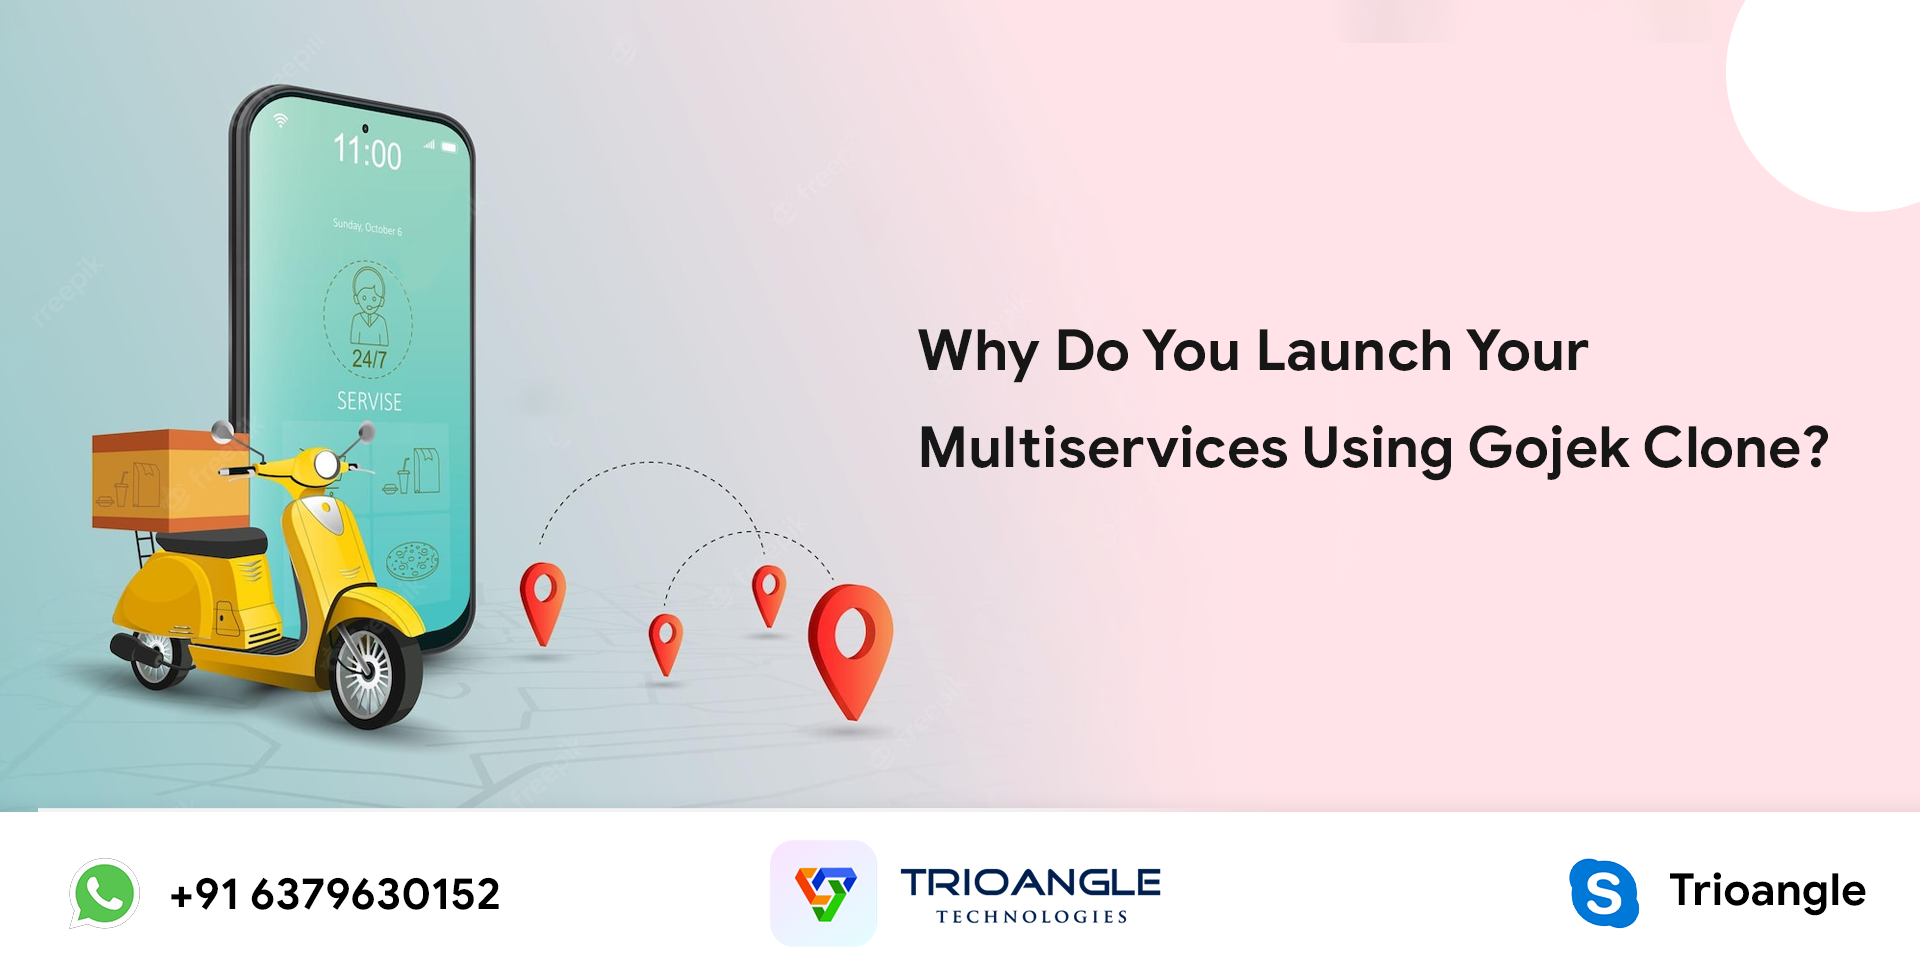 Why Do You Launch Your Multiservices Using Gojek Clone Script?